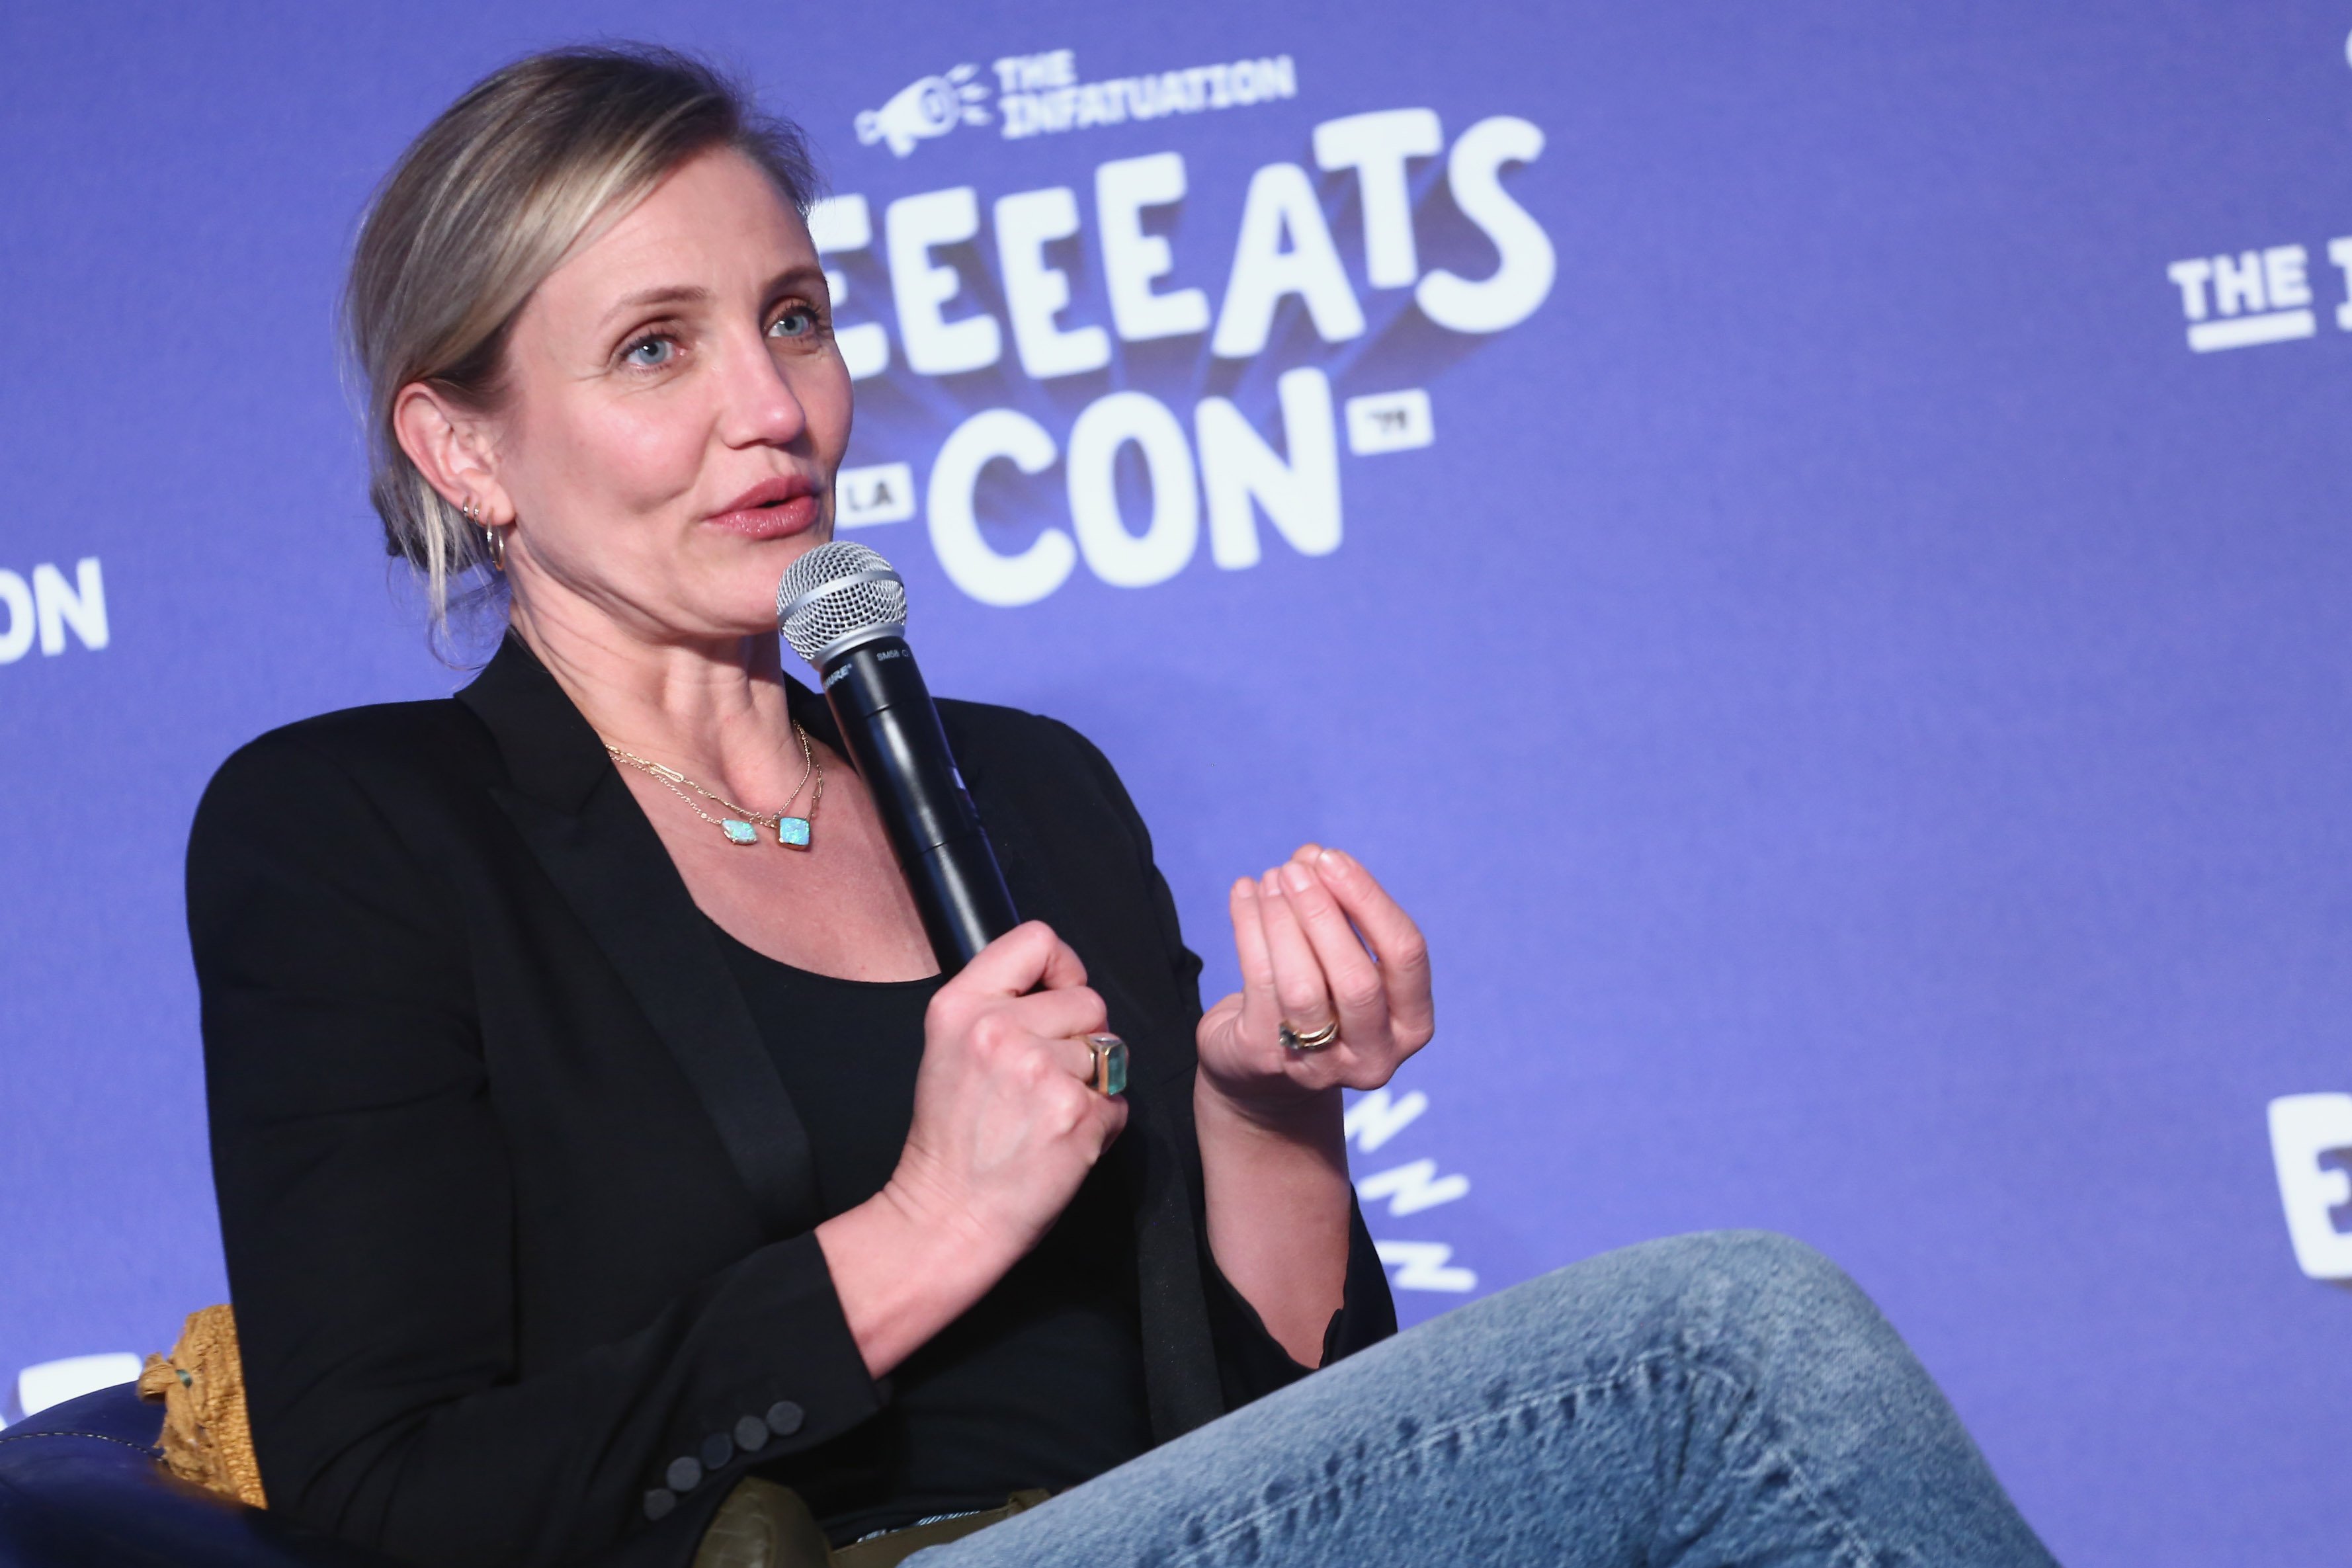 Cameron Diaz speaking at the EEEEEatscon 2019 on May 19, 2019 | Source: Getty Images